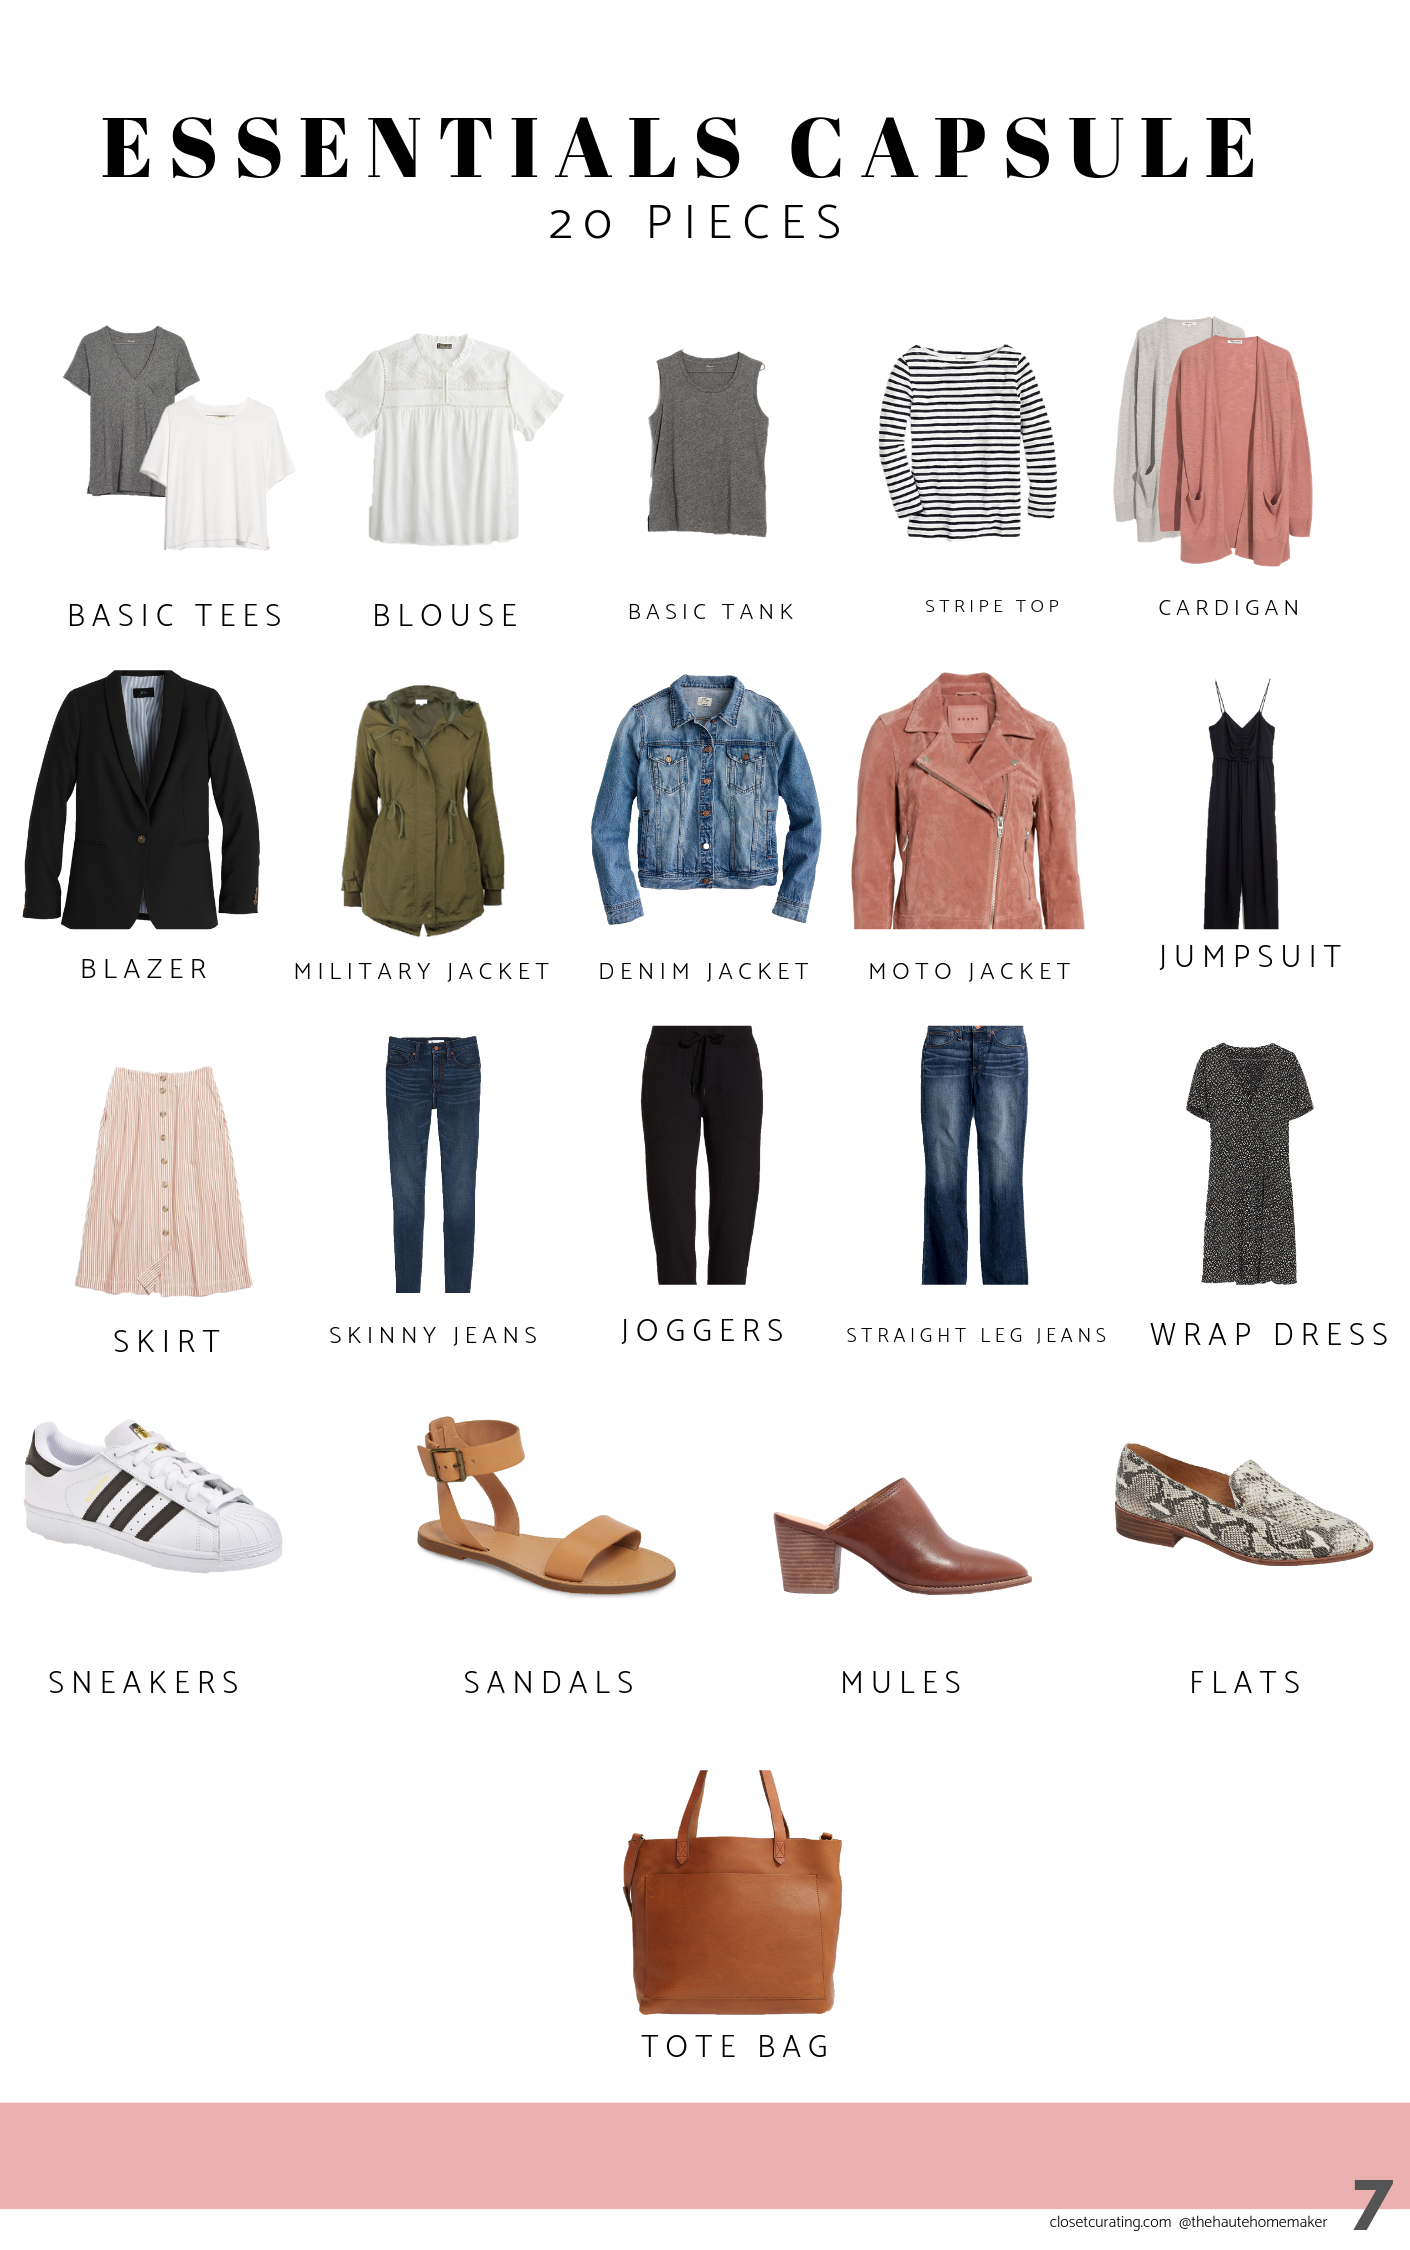 10 Must-Have Closet Essentials for Every Woman